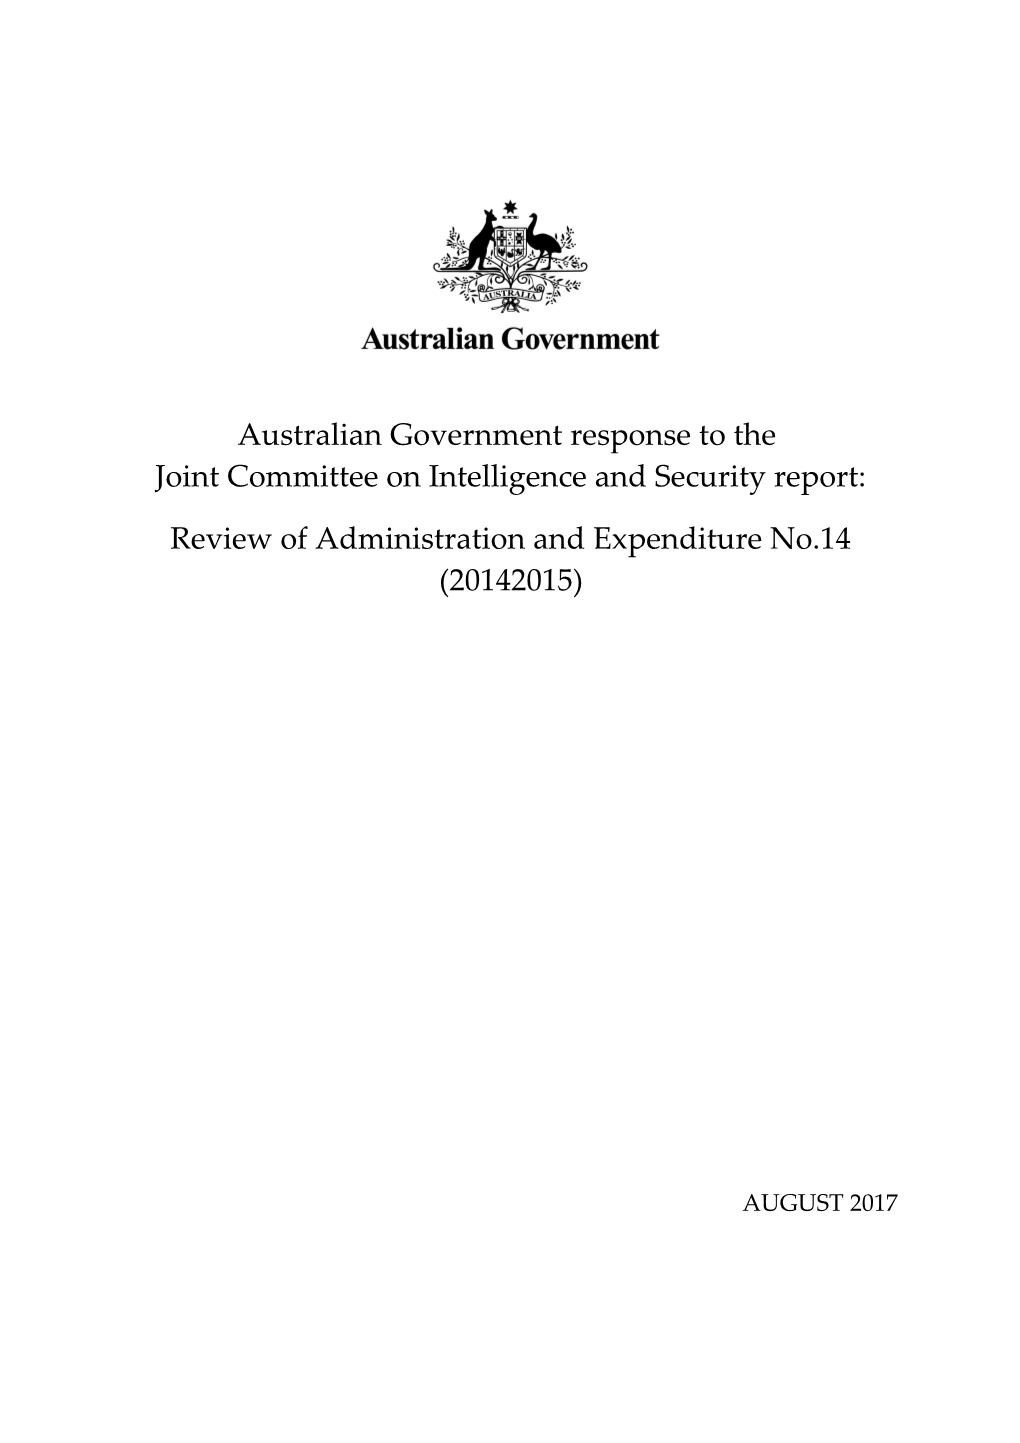 Australian Government Response to the Joint Committee on Intelligence and Security Review